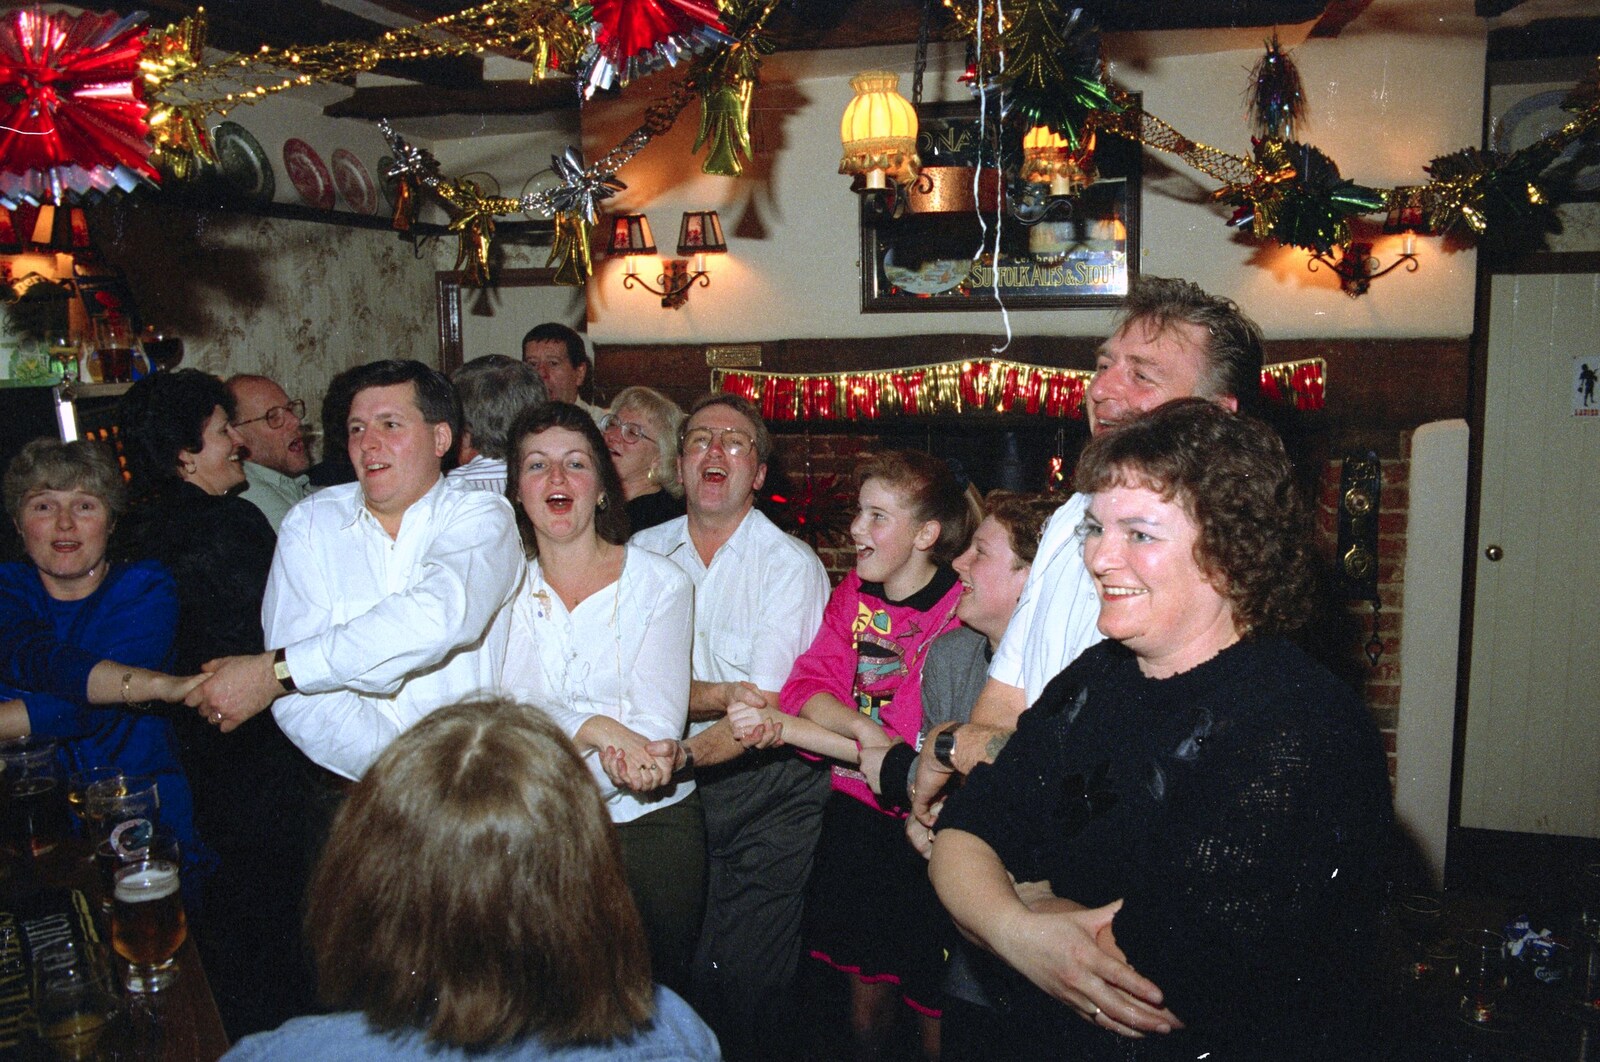 Auld Lang Syne breaks out in the pub from New Year's Eve at the Swan Inn, Brome, Suffolk - 31st December 1991